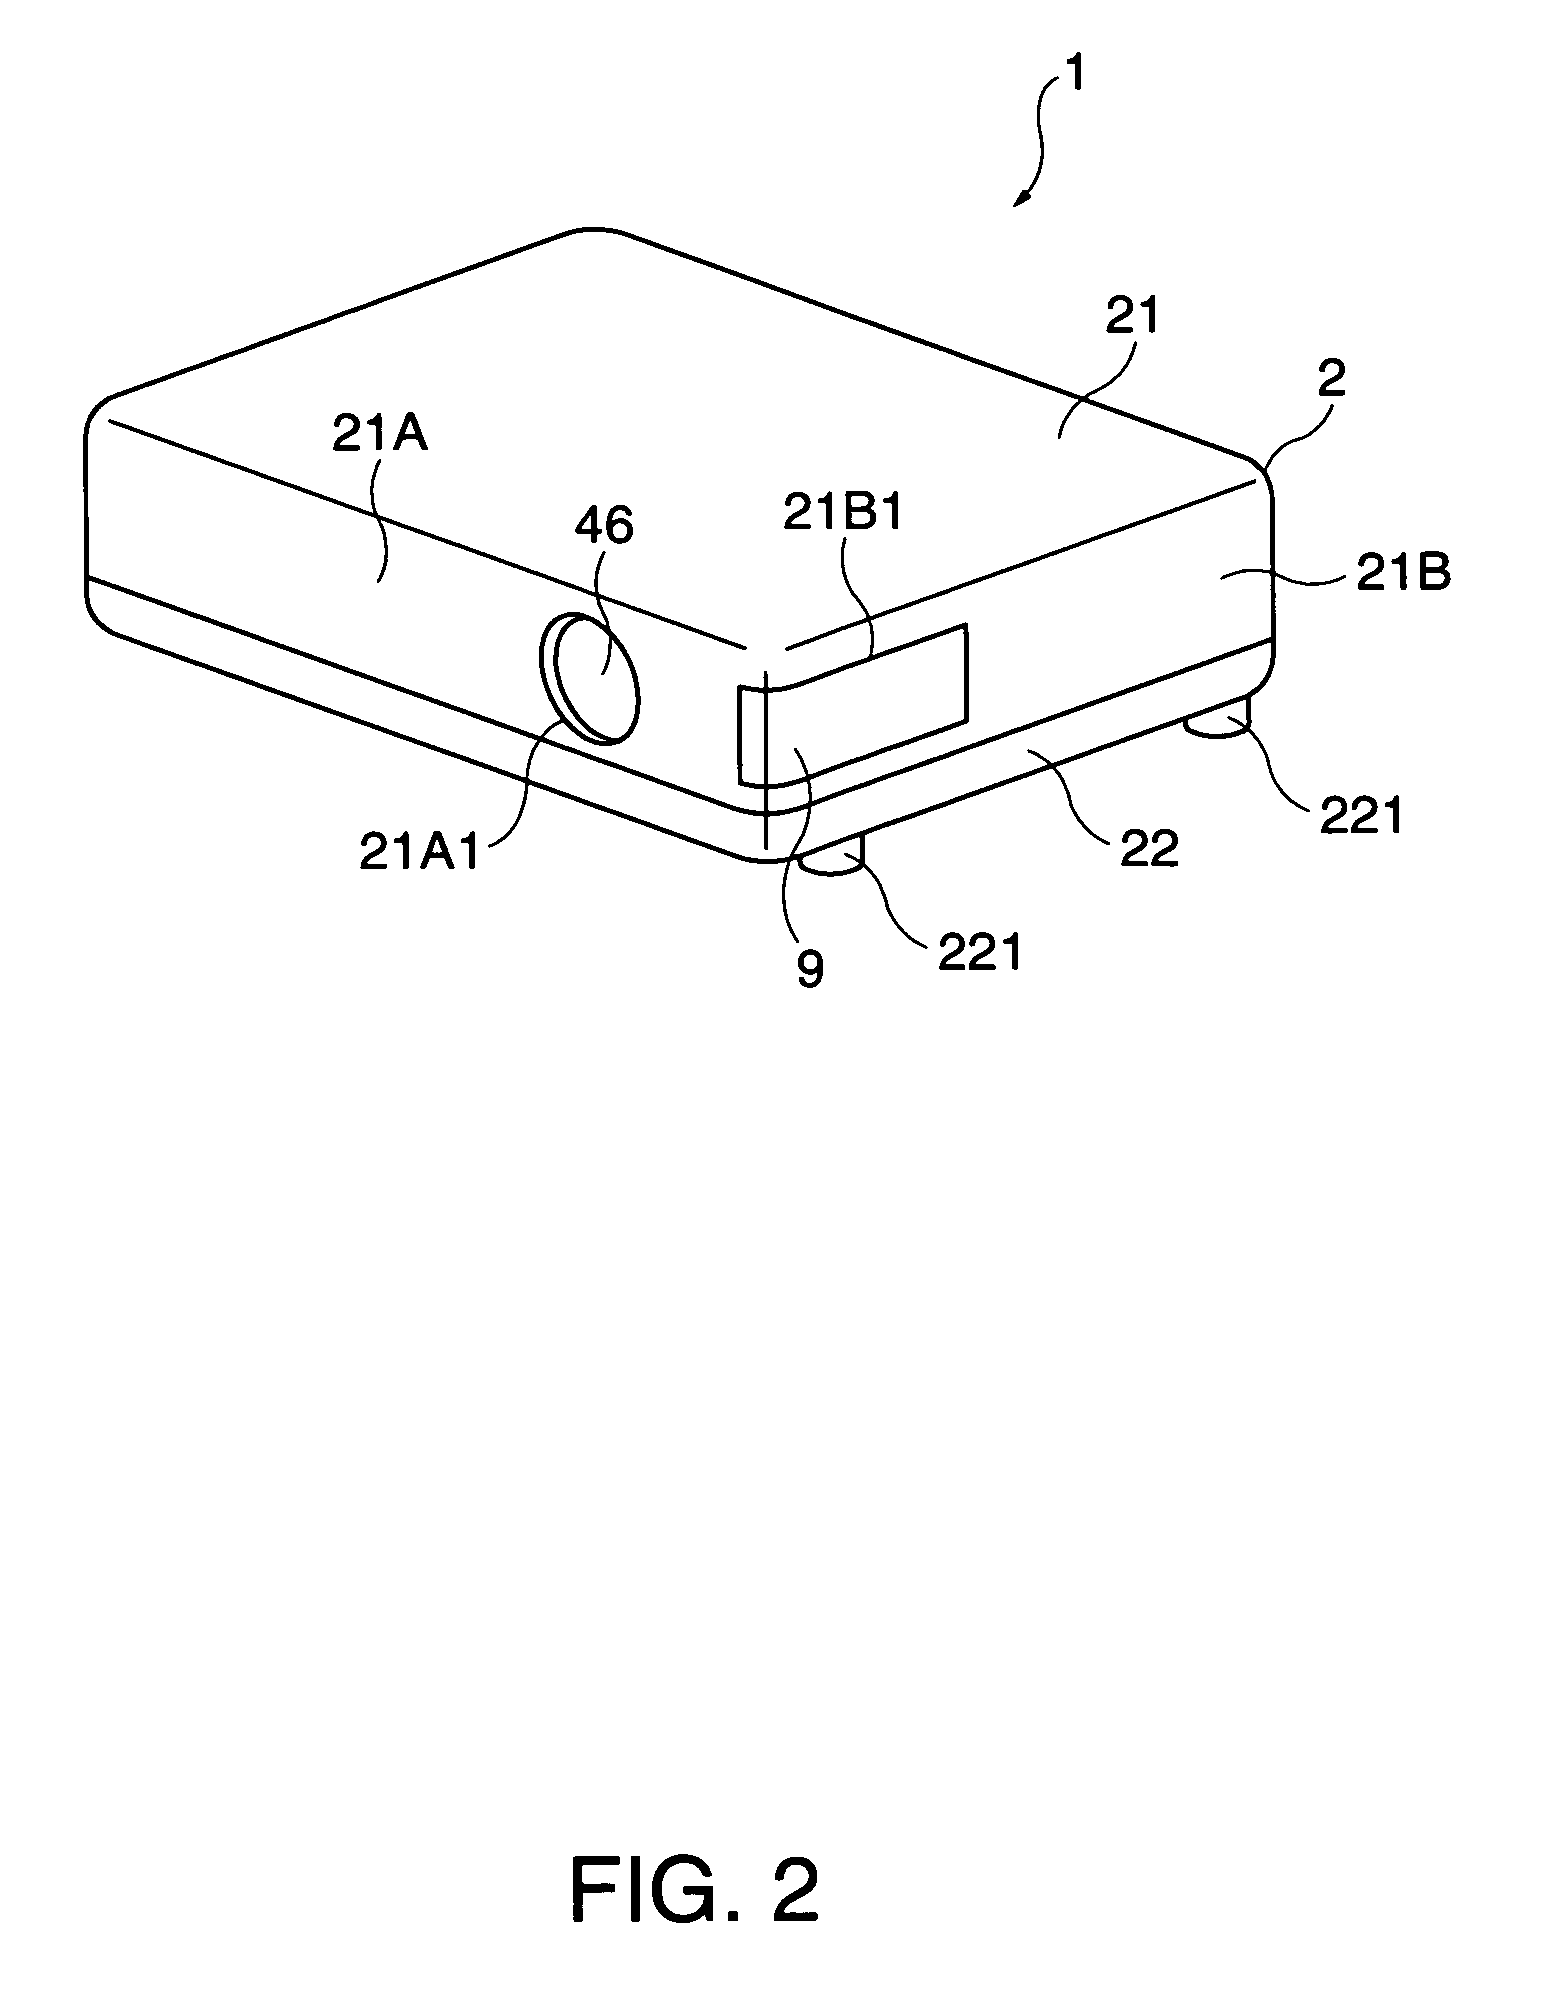 Electronic instrument and USB device